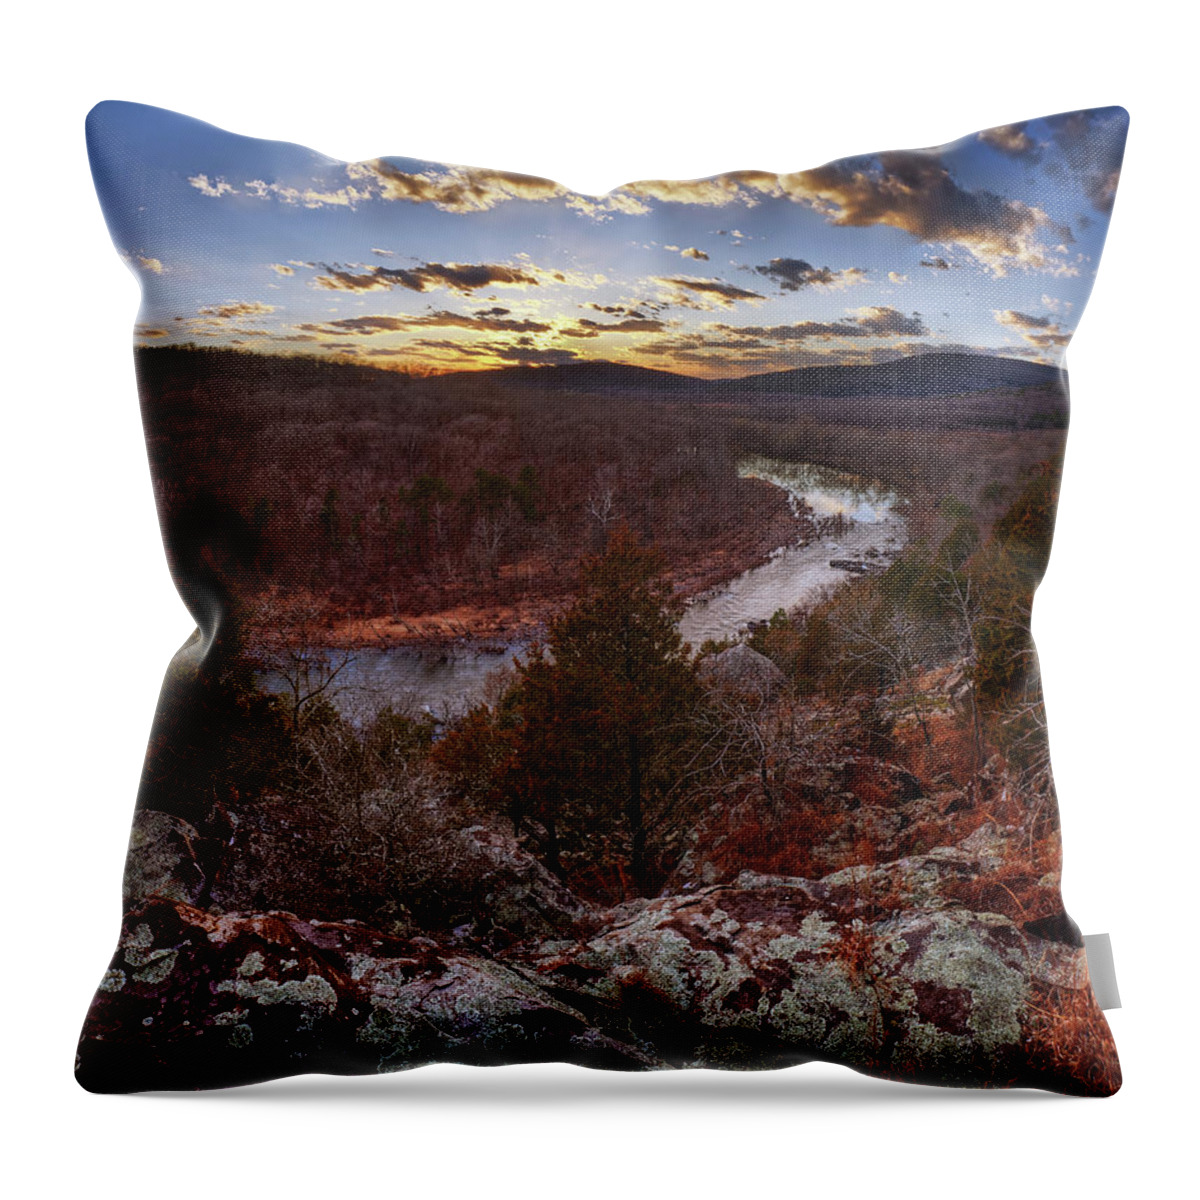 River Throw Pillow featuring the photograph St. Francis River by Robert Charity